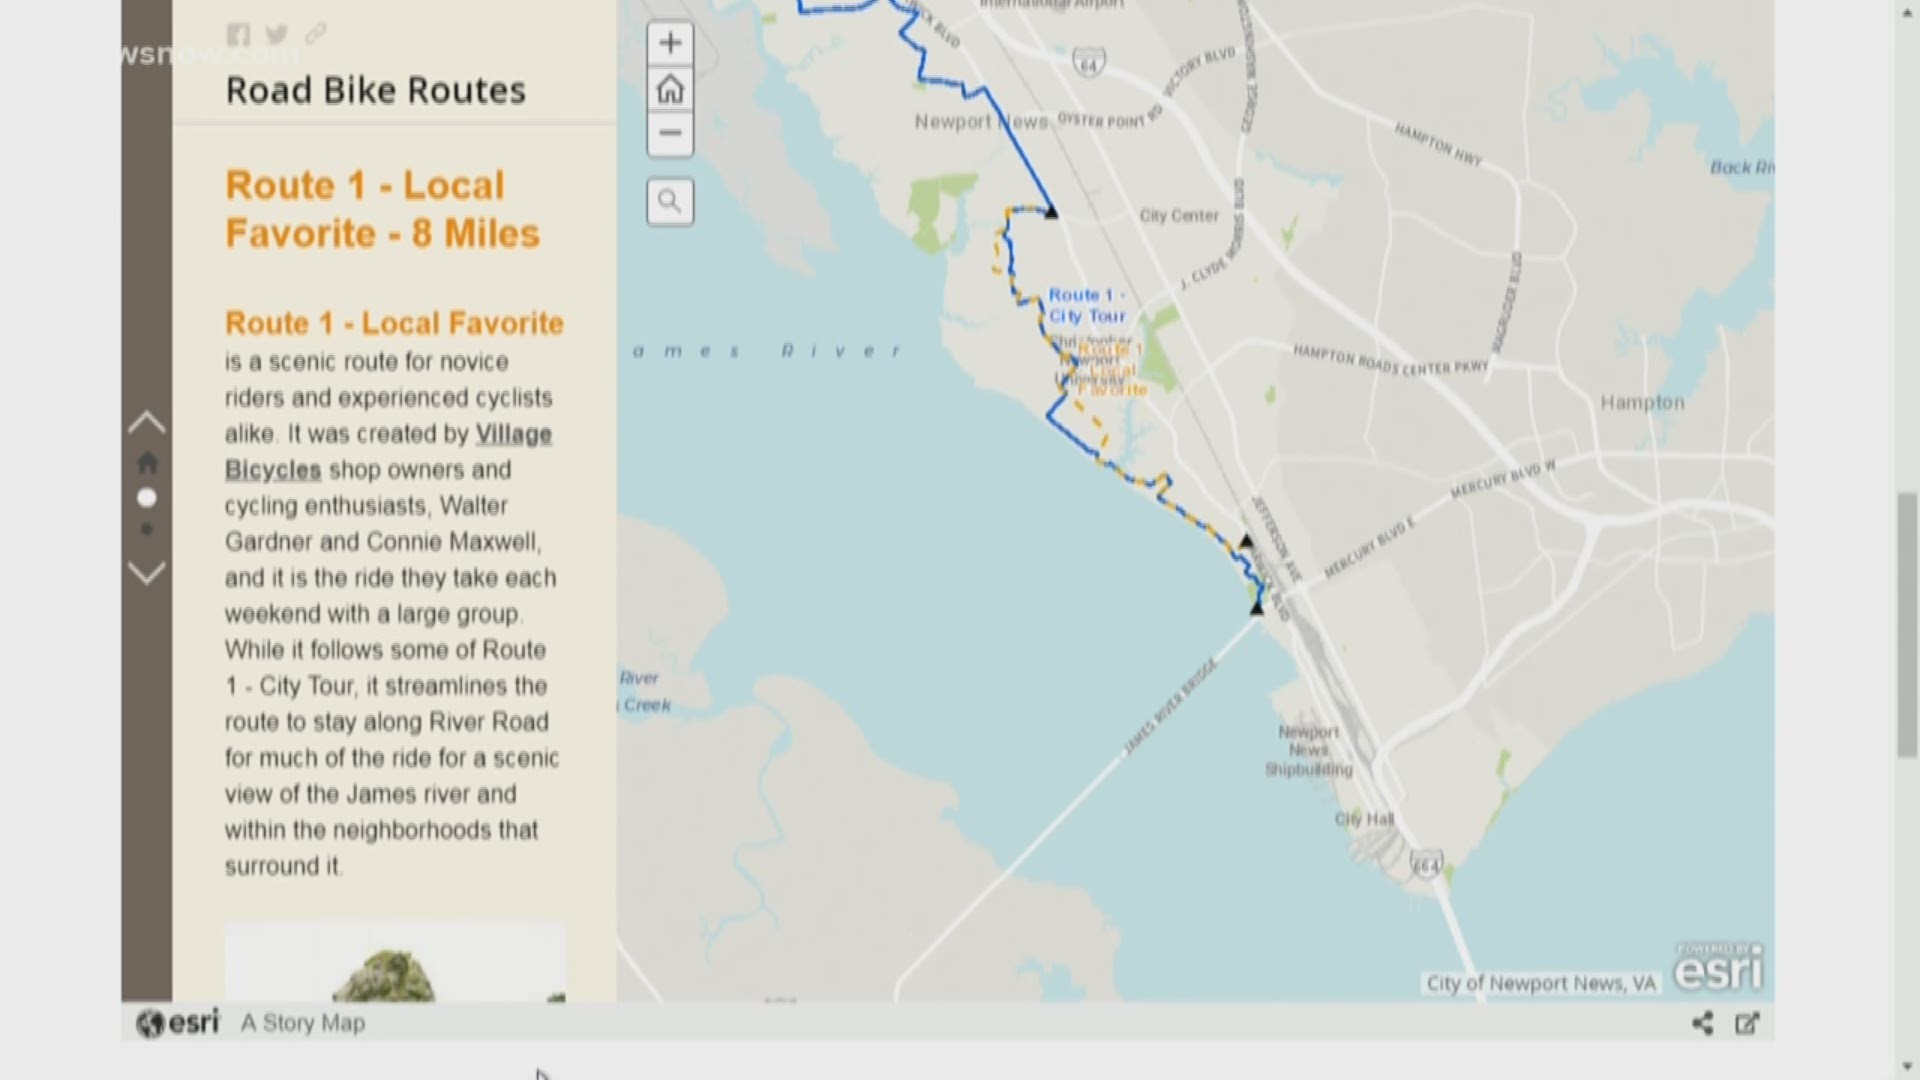 The City of Newport News is adding new resources to their website, like maps of local bike trails.